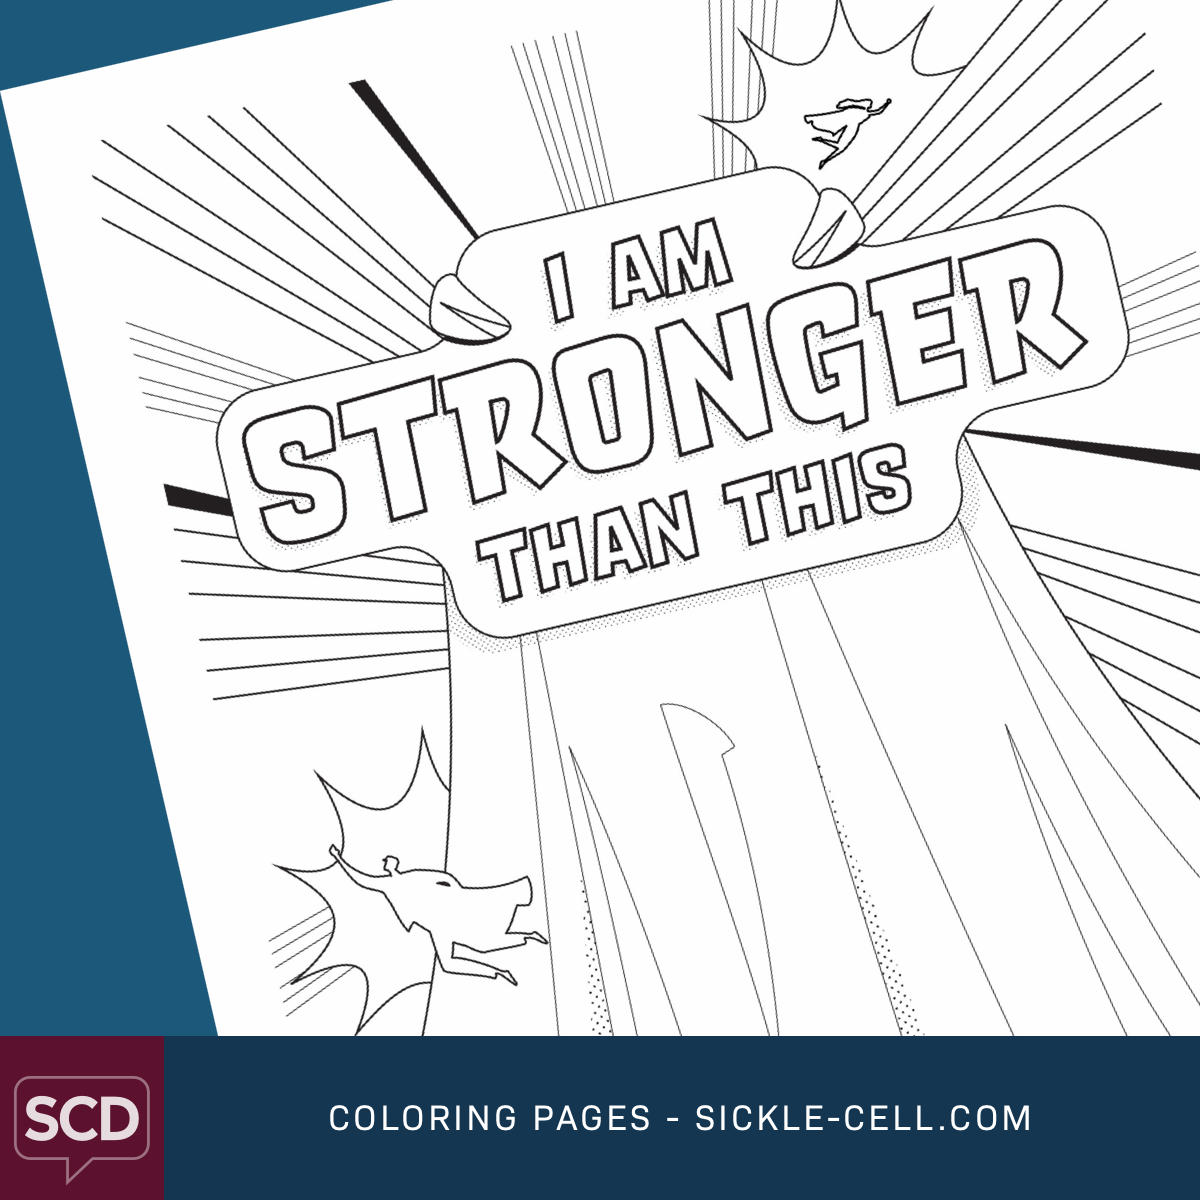 sickle-cell themed coloring pages